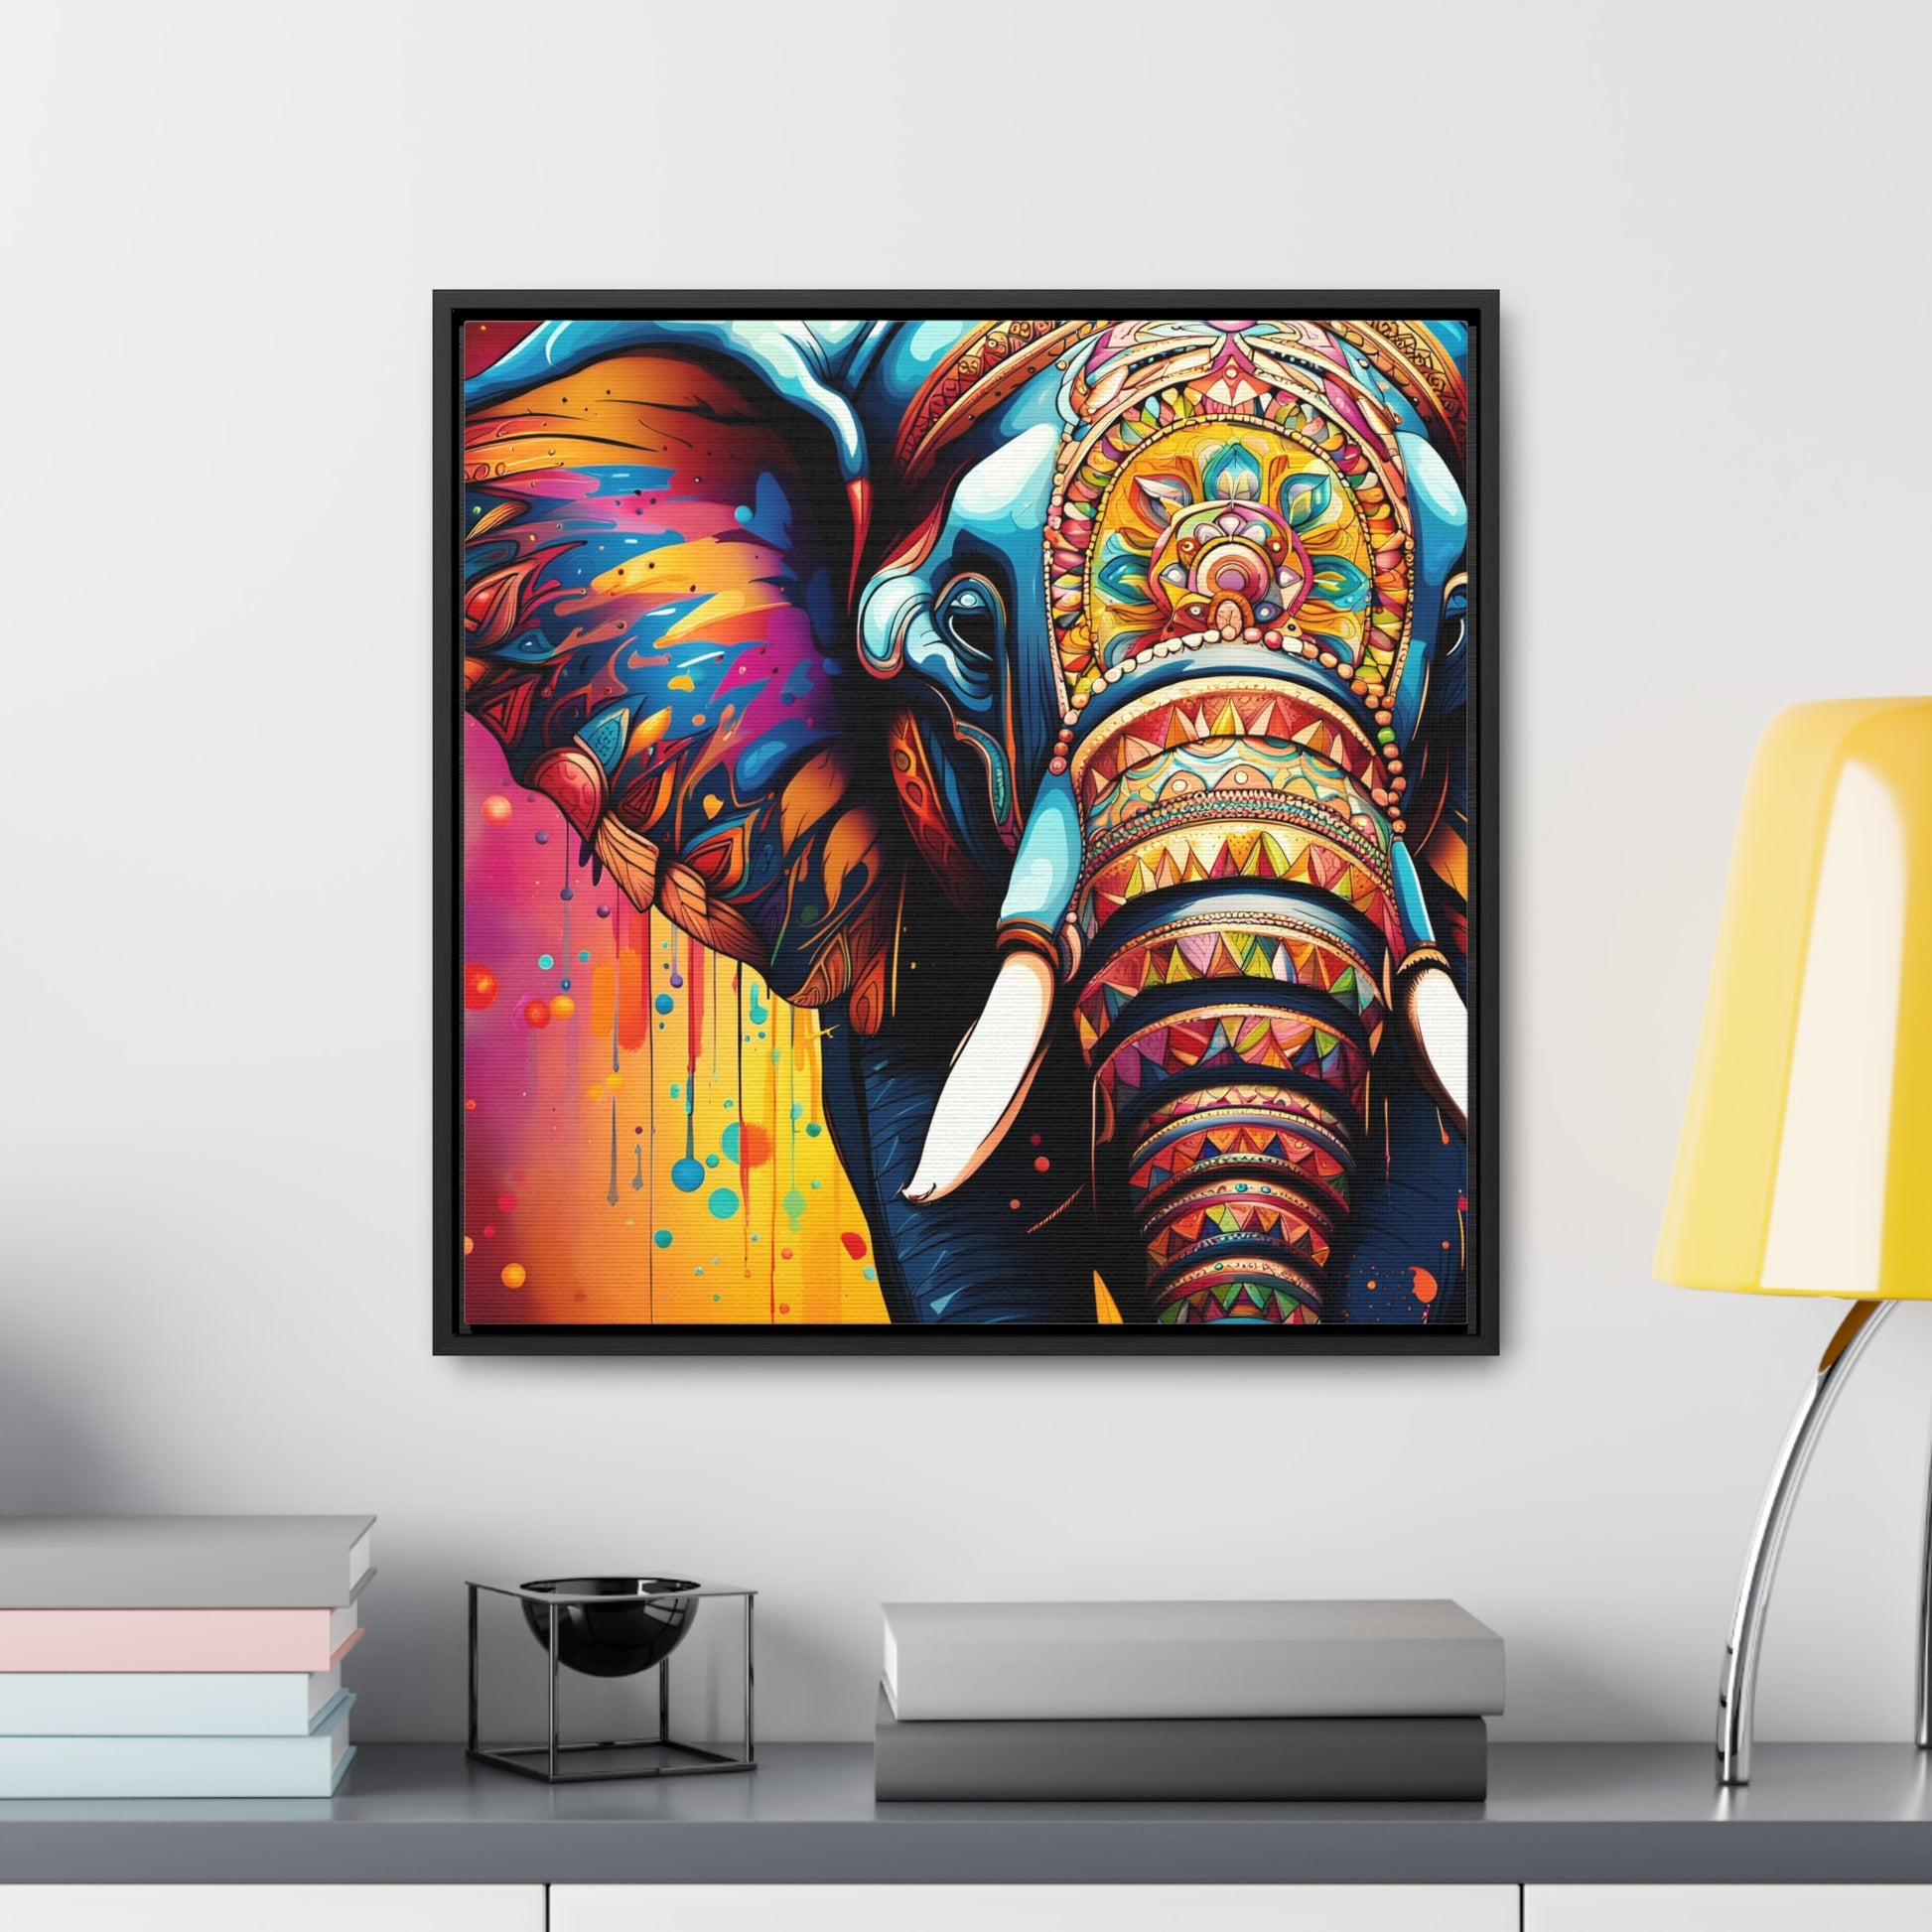 Stunning Multicolor Elephant Head Print on Canvas in a Floating Frame 20x20 hung on light wall